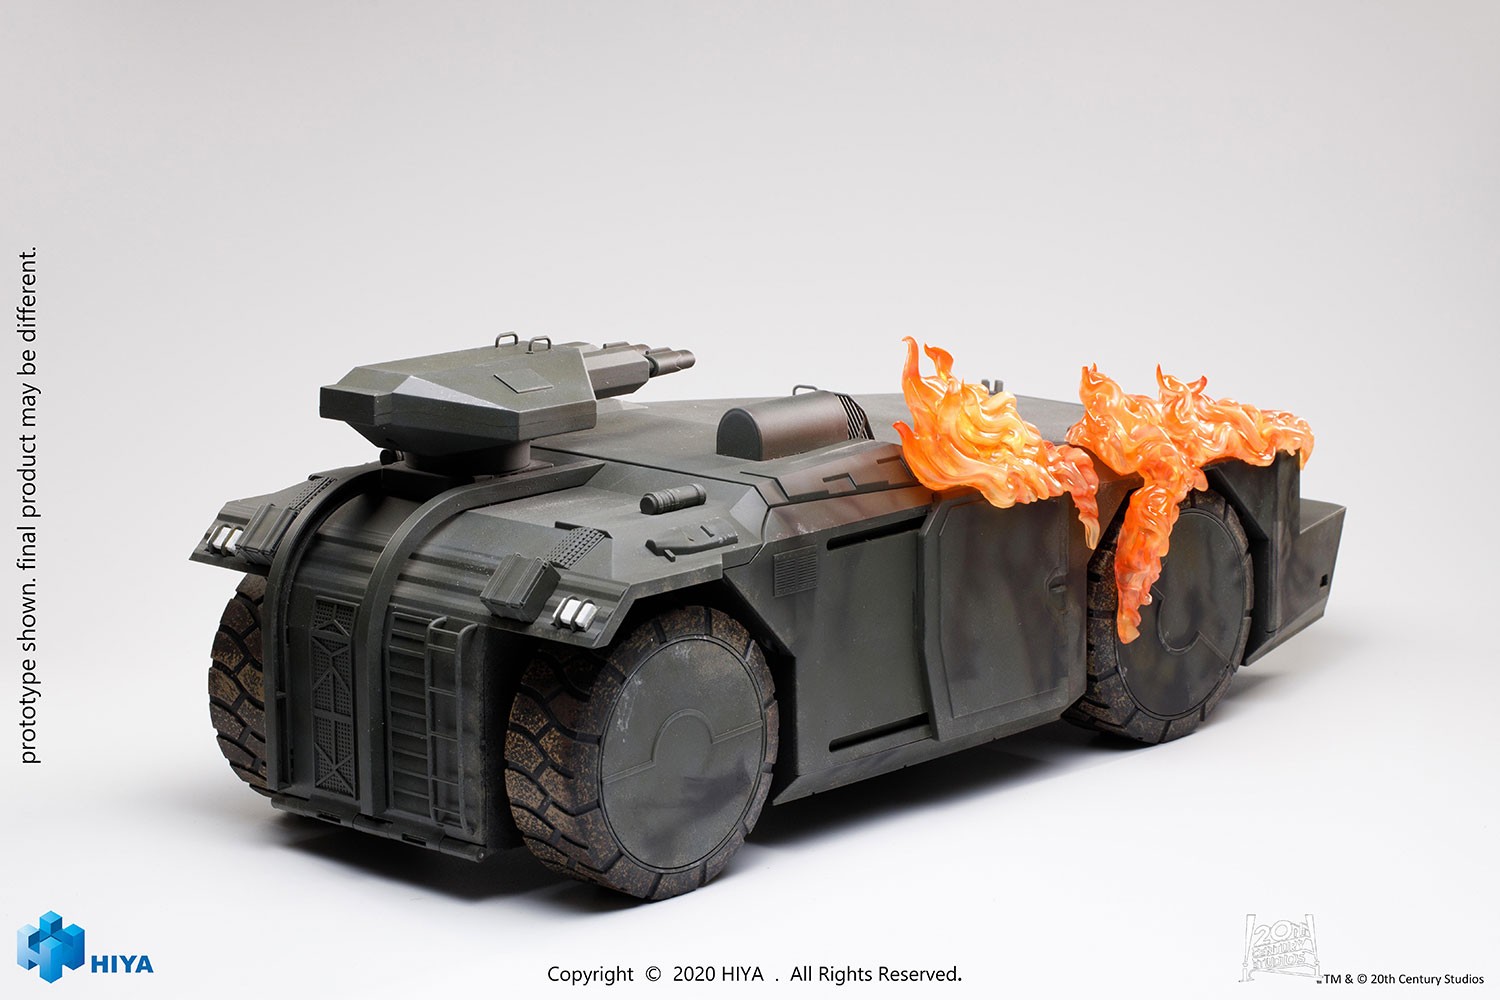 Burning Armored Personnel Carrier (Prototype Shown) View 6